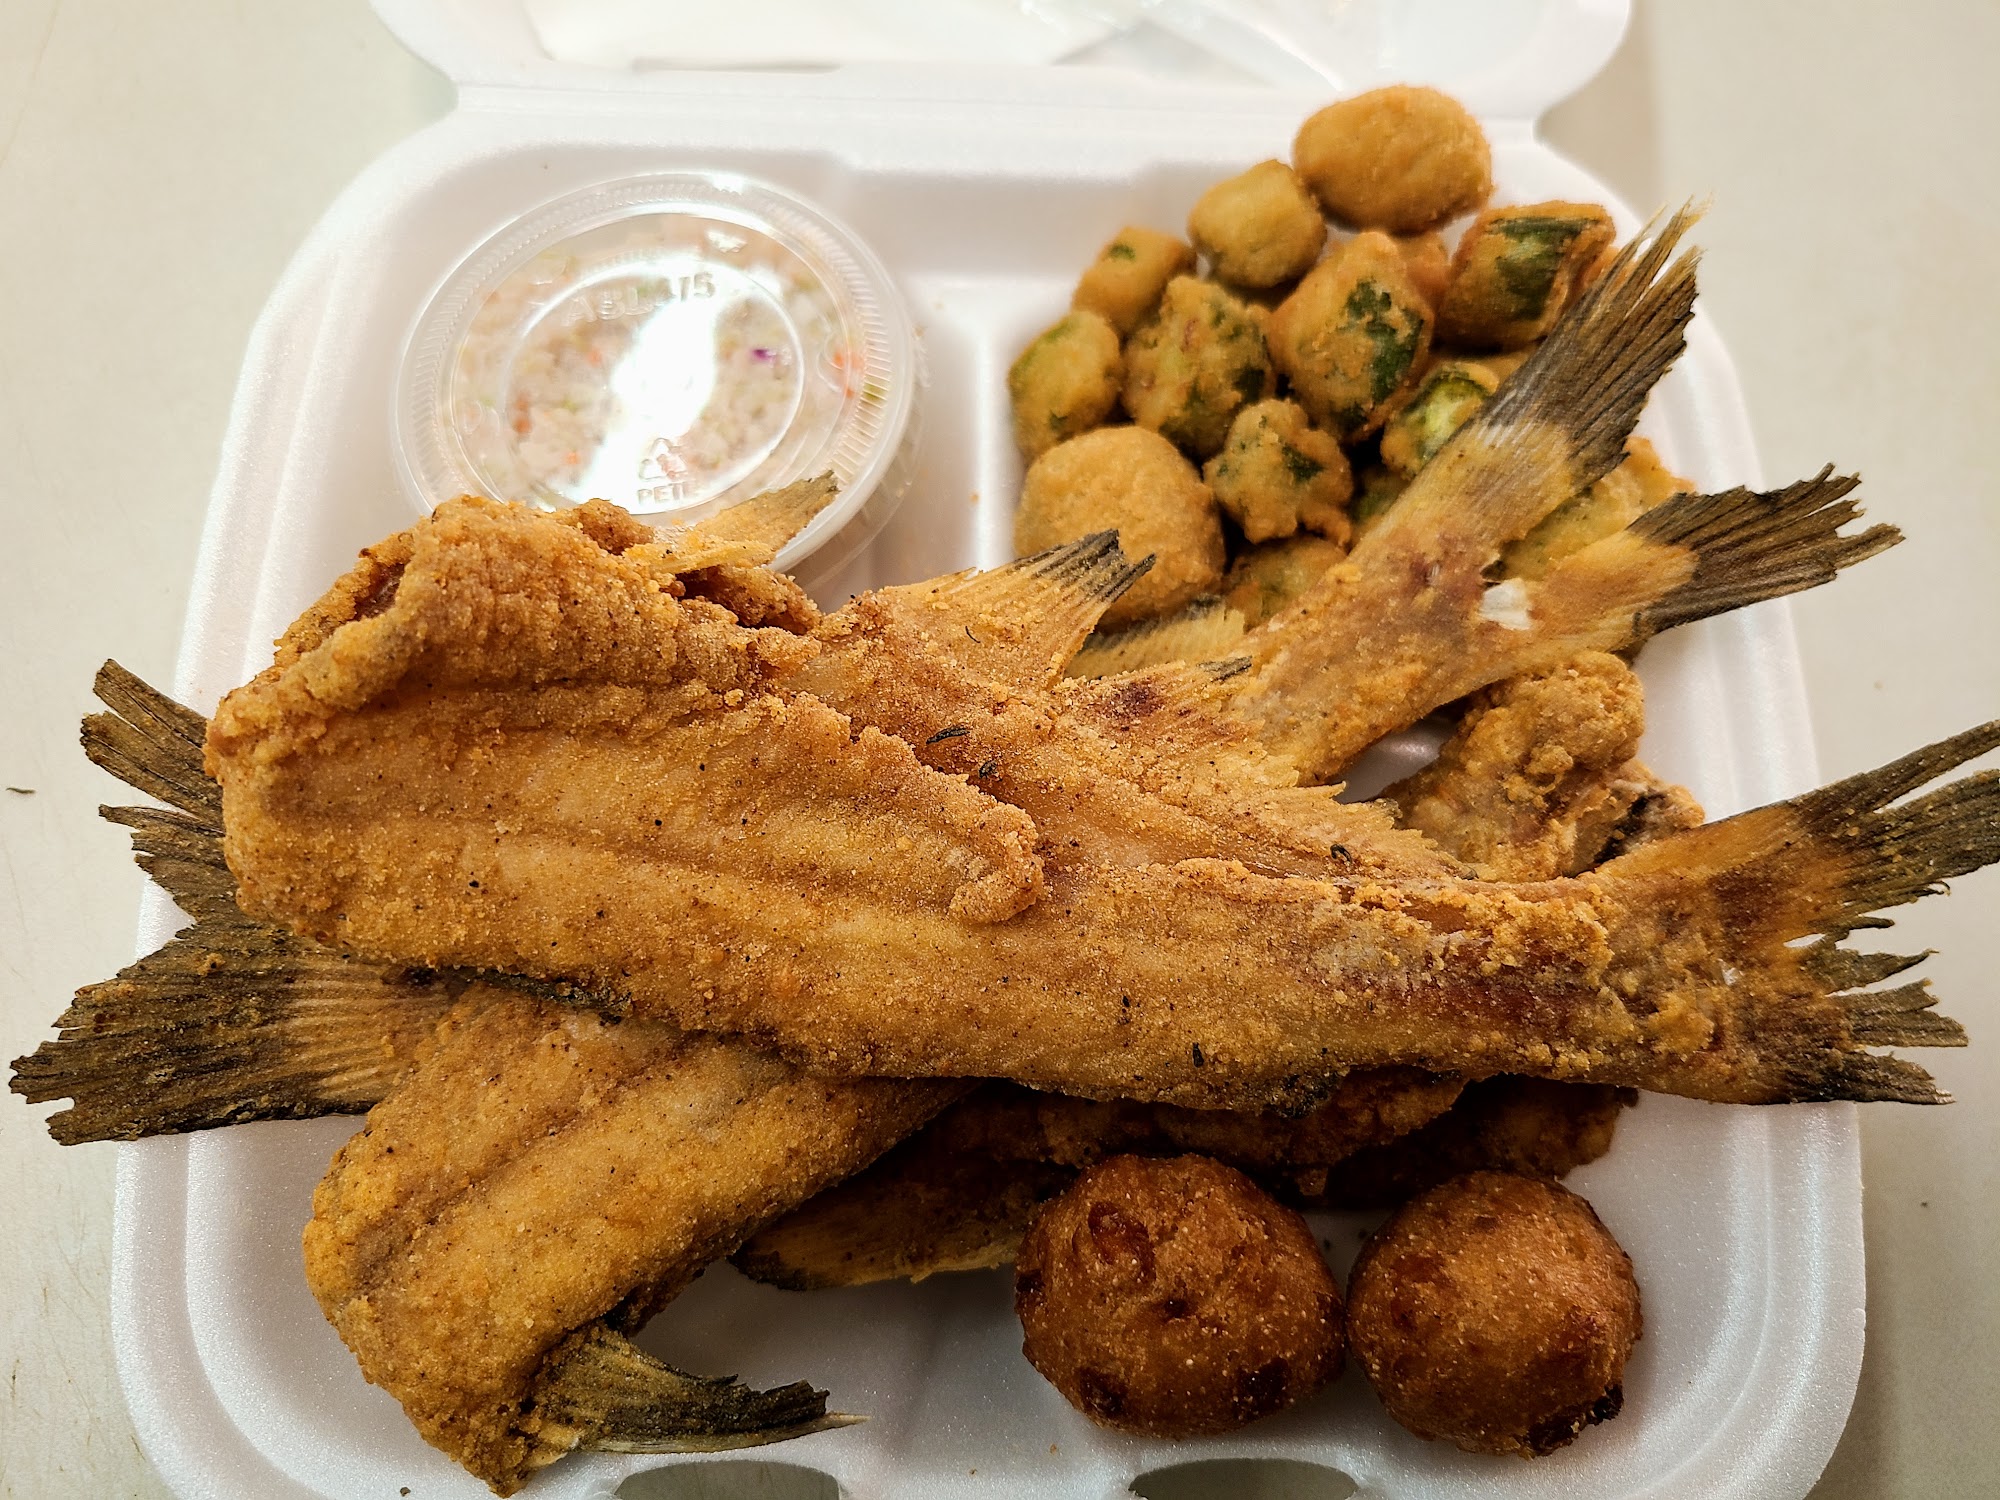 OFF THE HOOK FISH & SEAFOOD